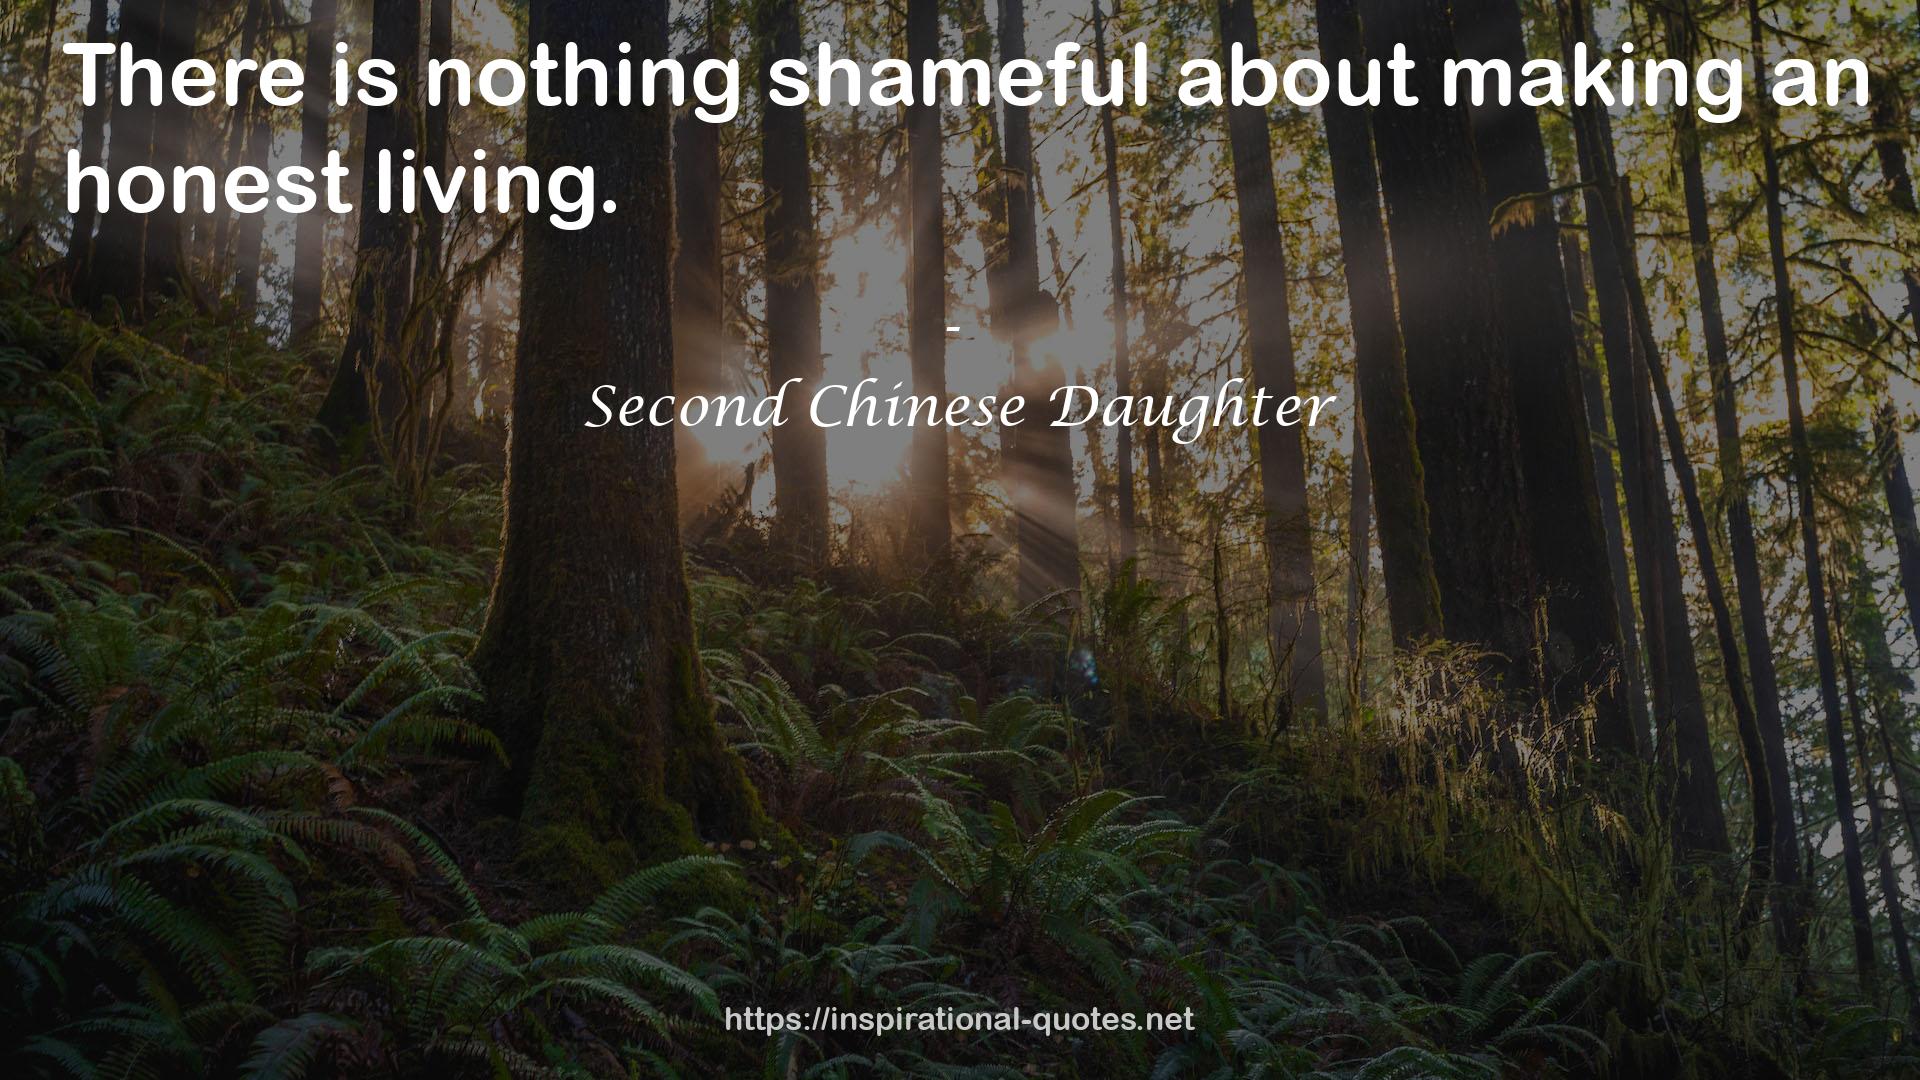 Second Chinese Daughter QUOTES